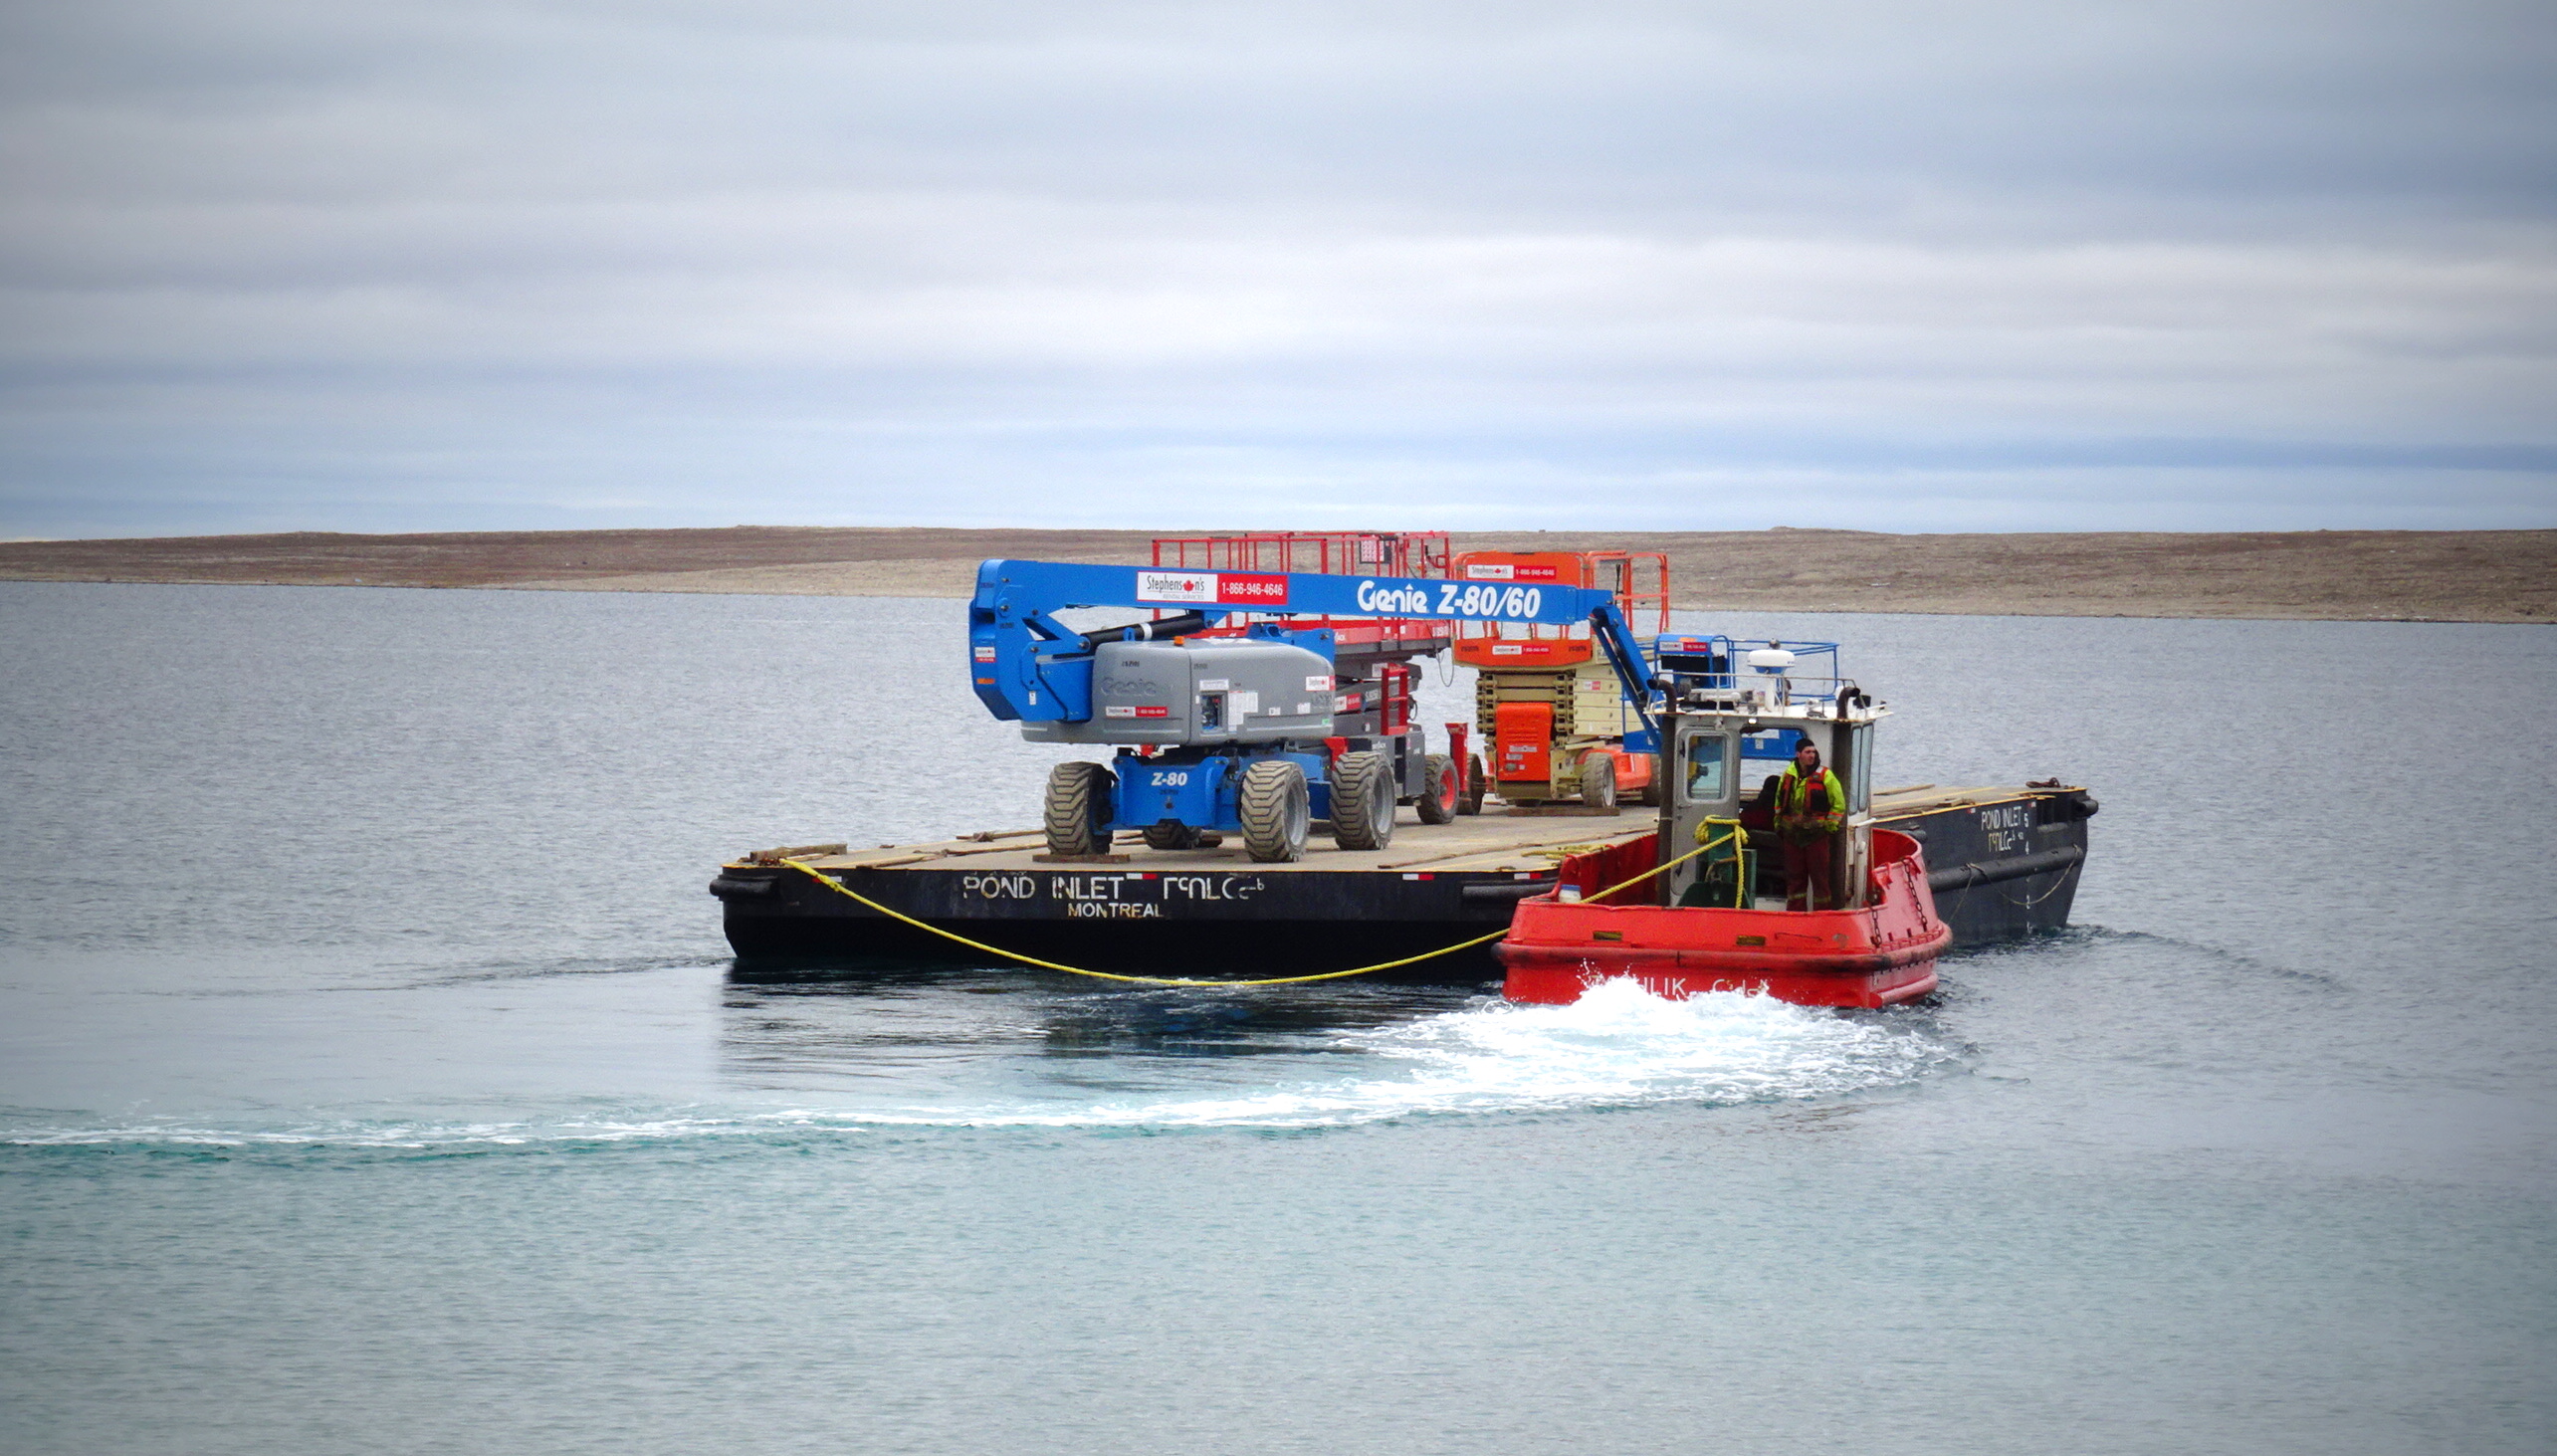 You can find lots of marine shipping activity around Cambridge Bay, which will now be part of an impact assessment project. (PHOTO BY JANE GEORGE)